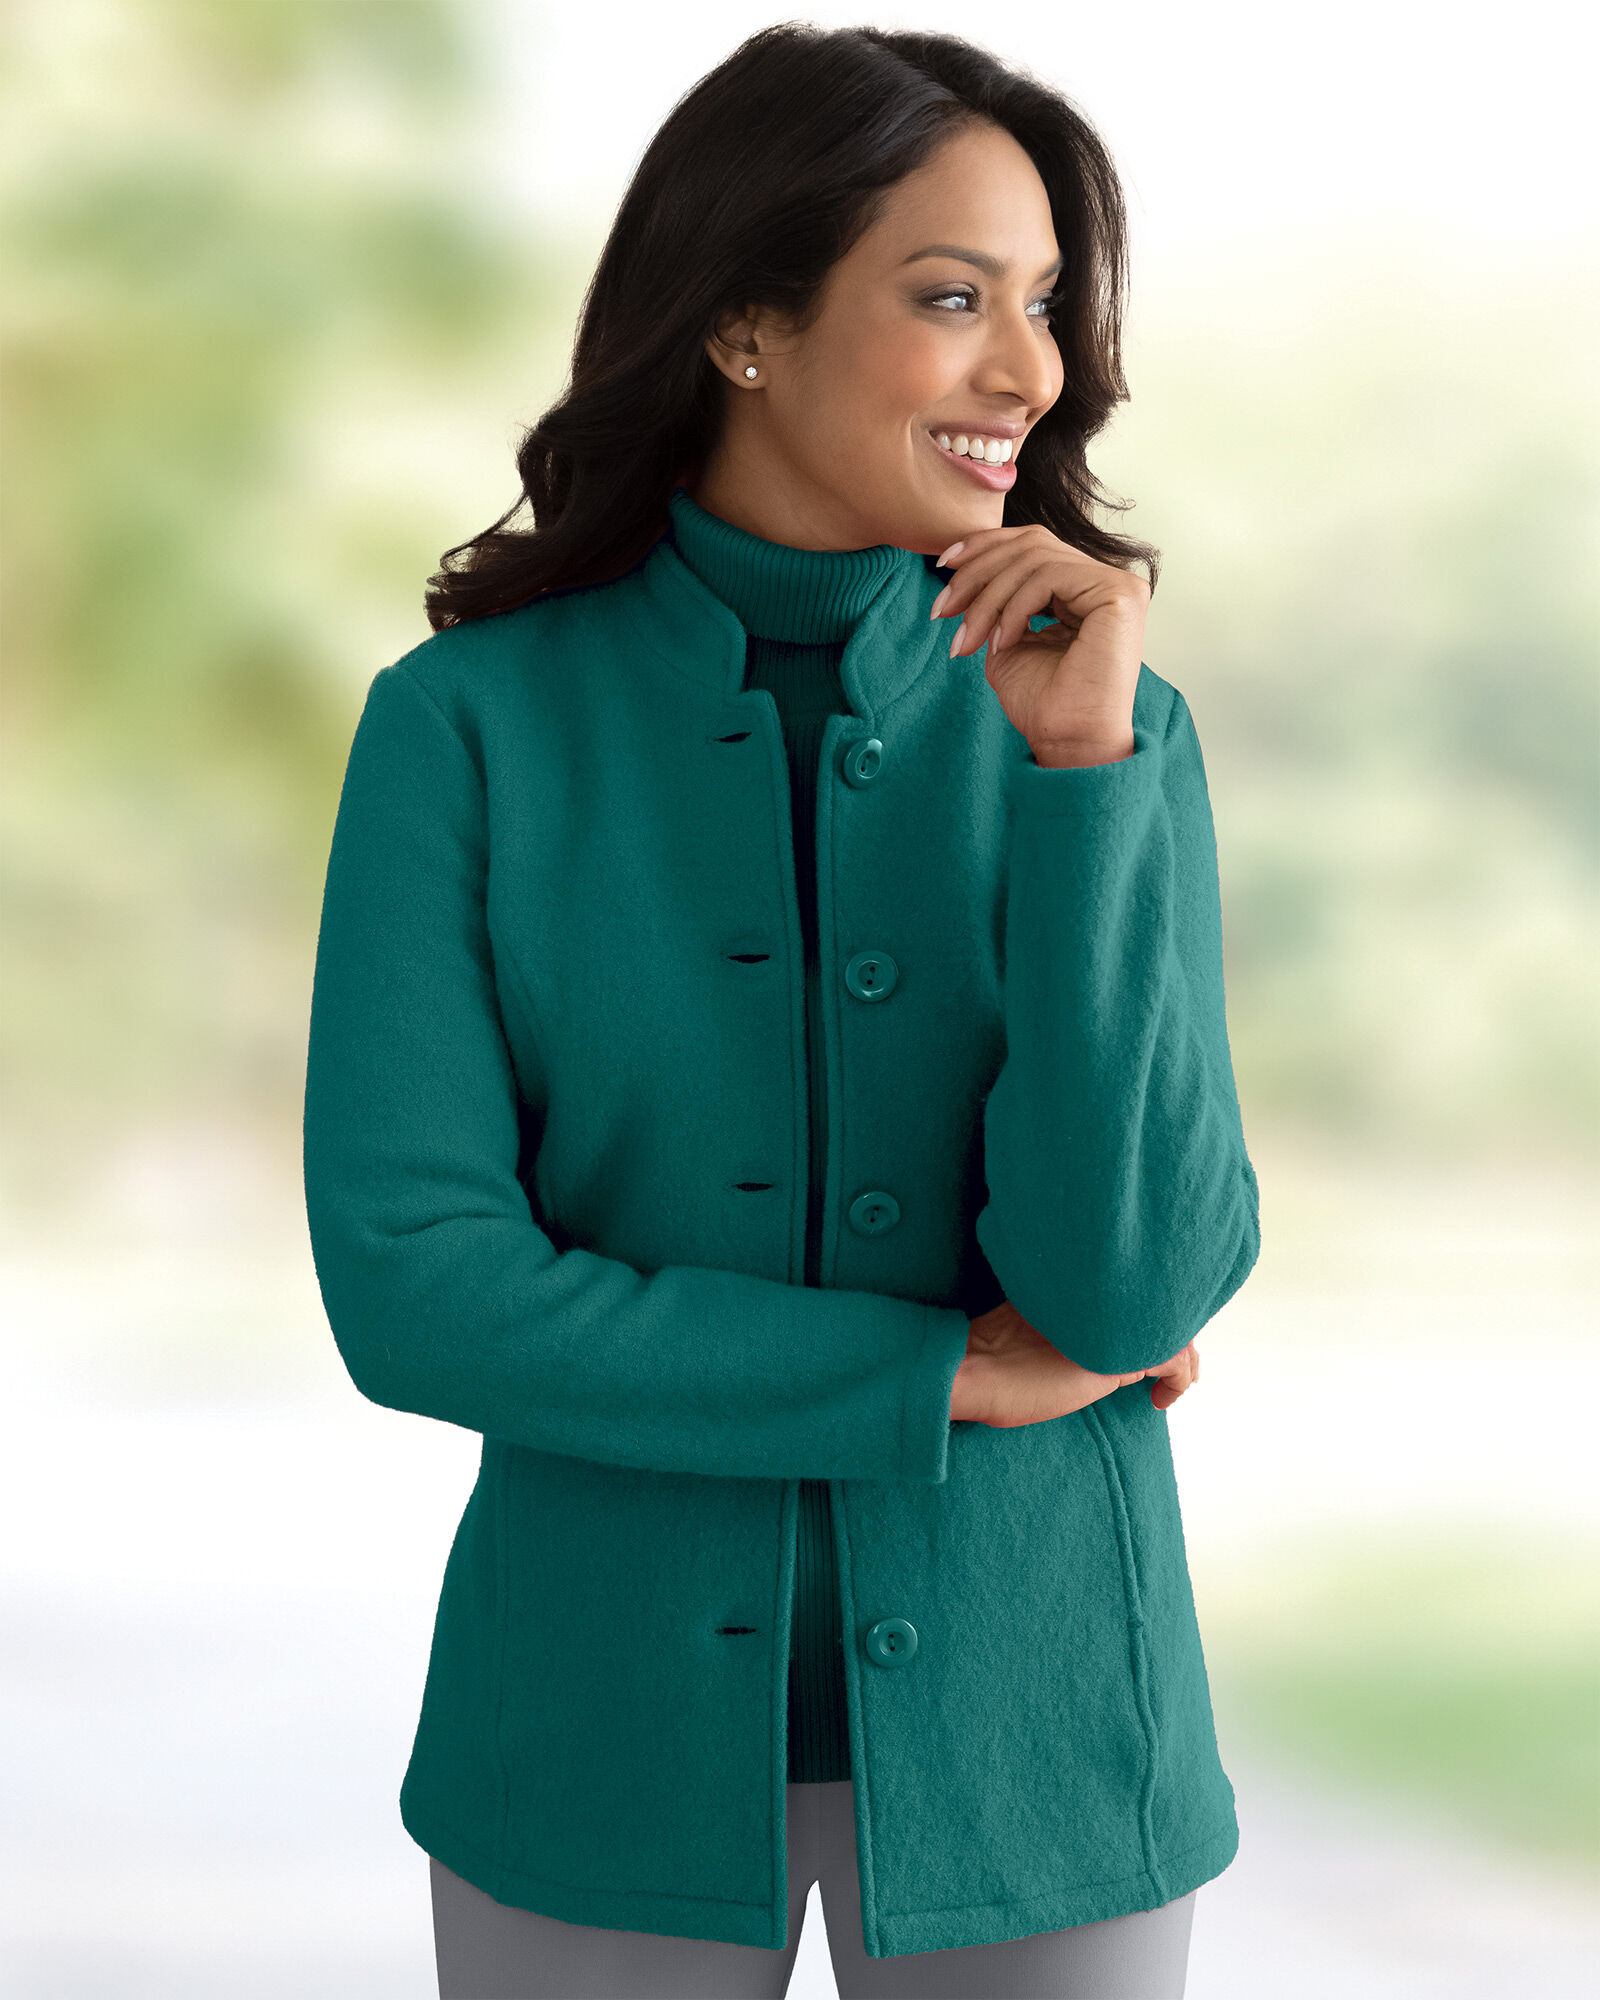 Updated Boiled Wool Jacket | Appleseeds